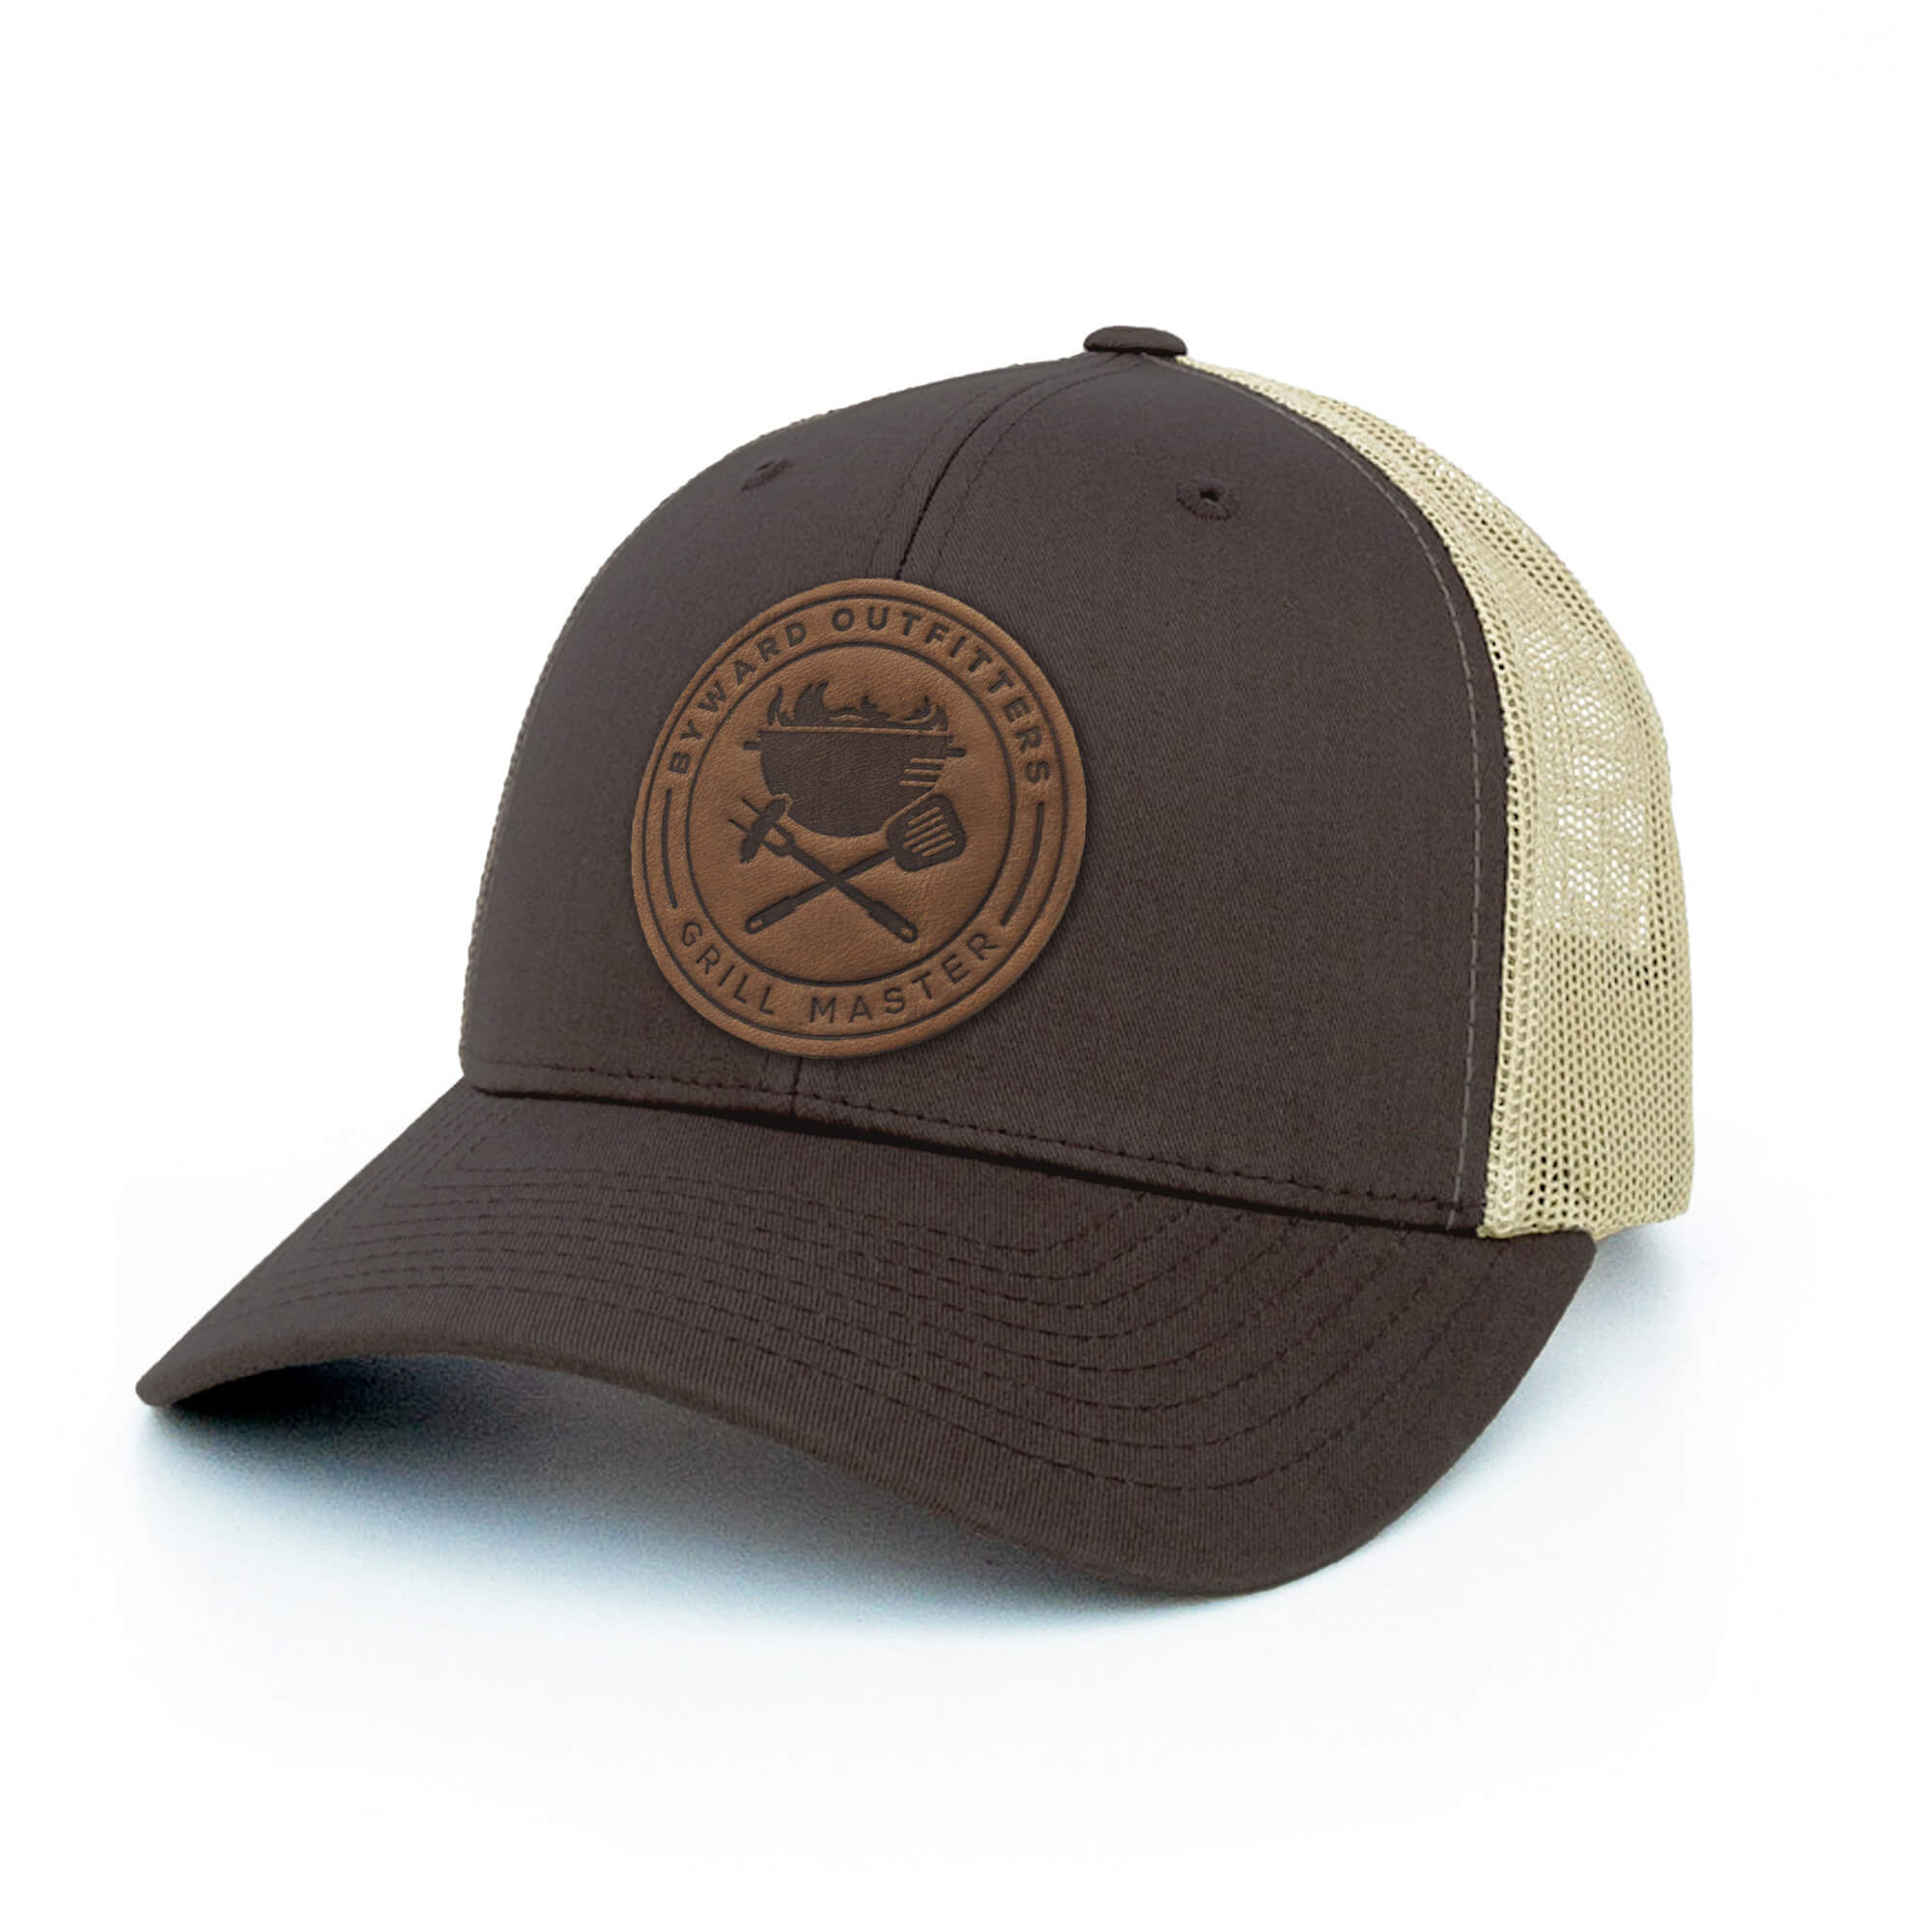 Brown and khaki trucker hat with full-grain leather patch of Grill Master | BLACK-006-002, CHARC-006-002, NAVY-006-002, HGREY-006-002, MOSS-006-002, BROWN-006-002